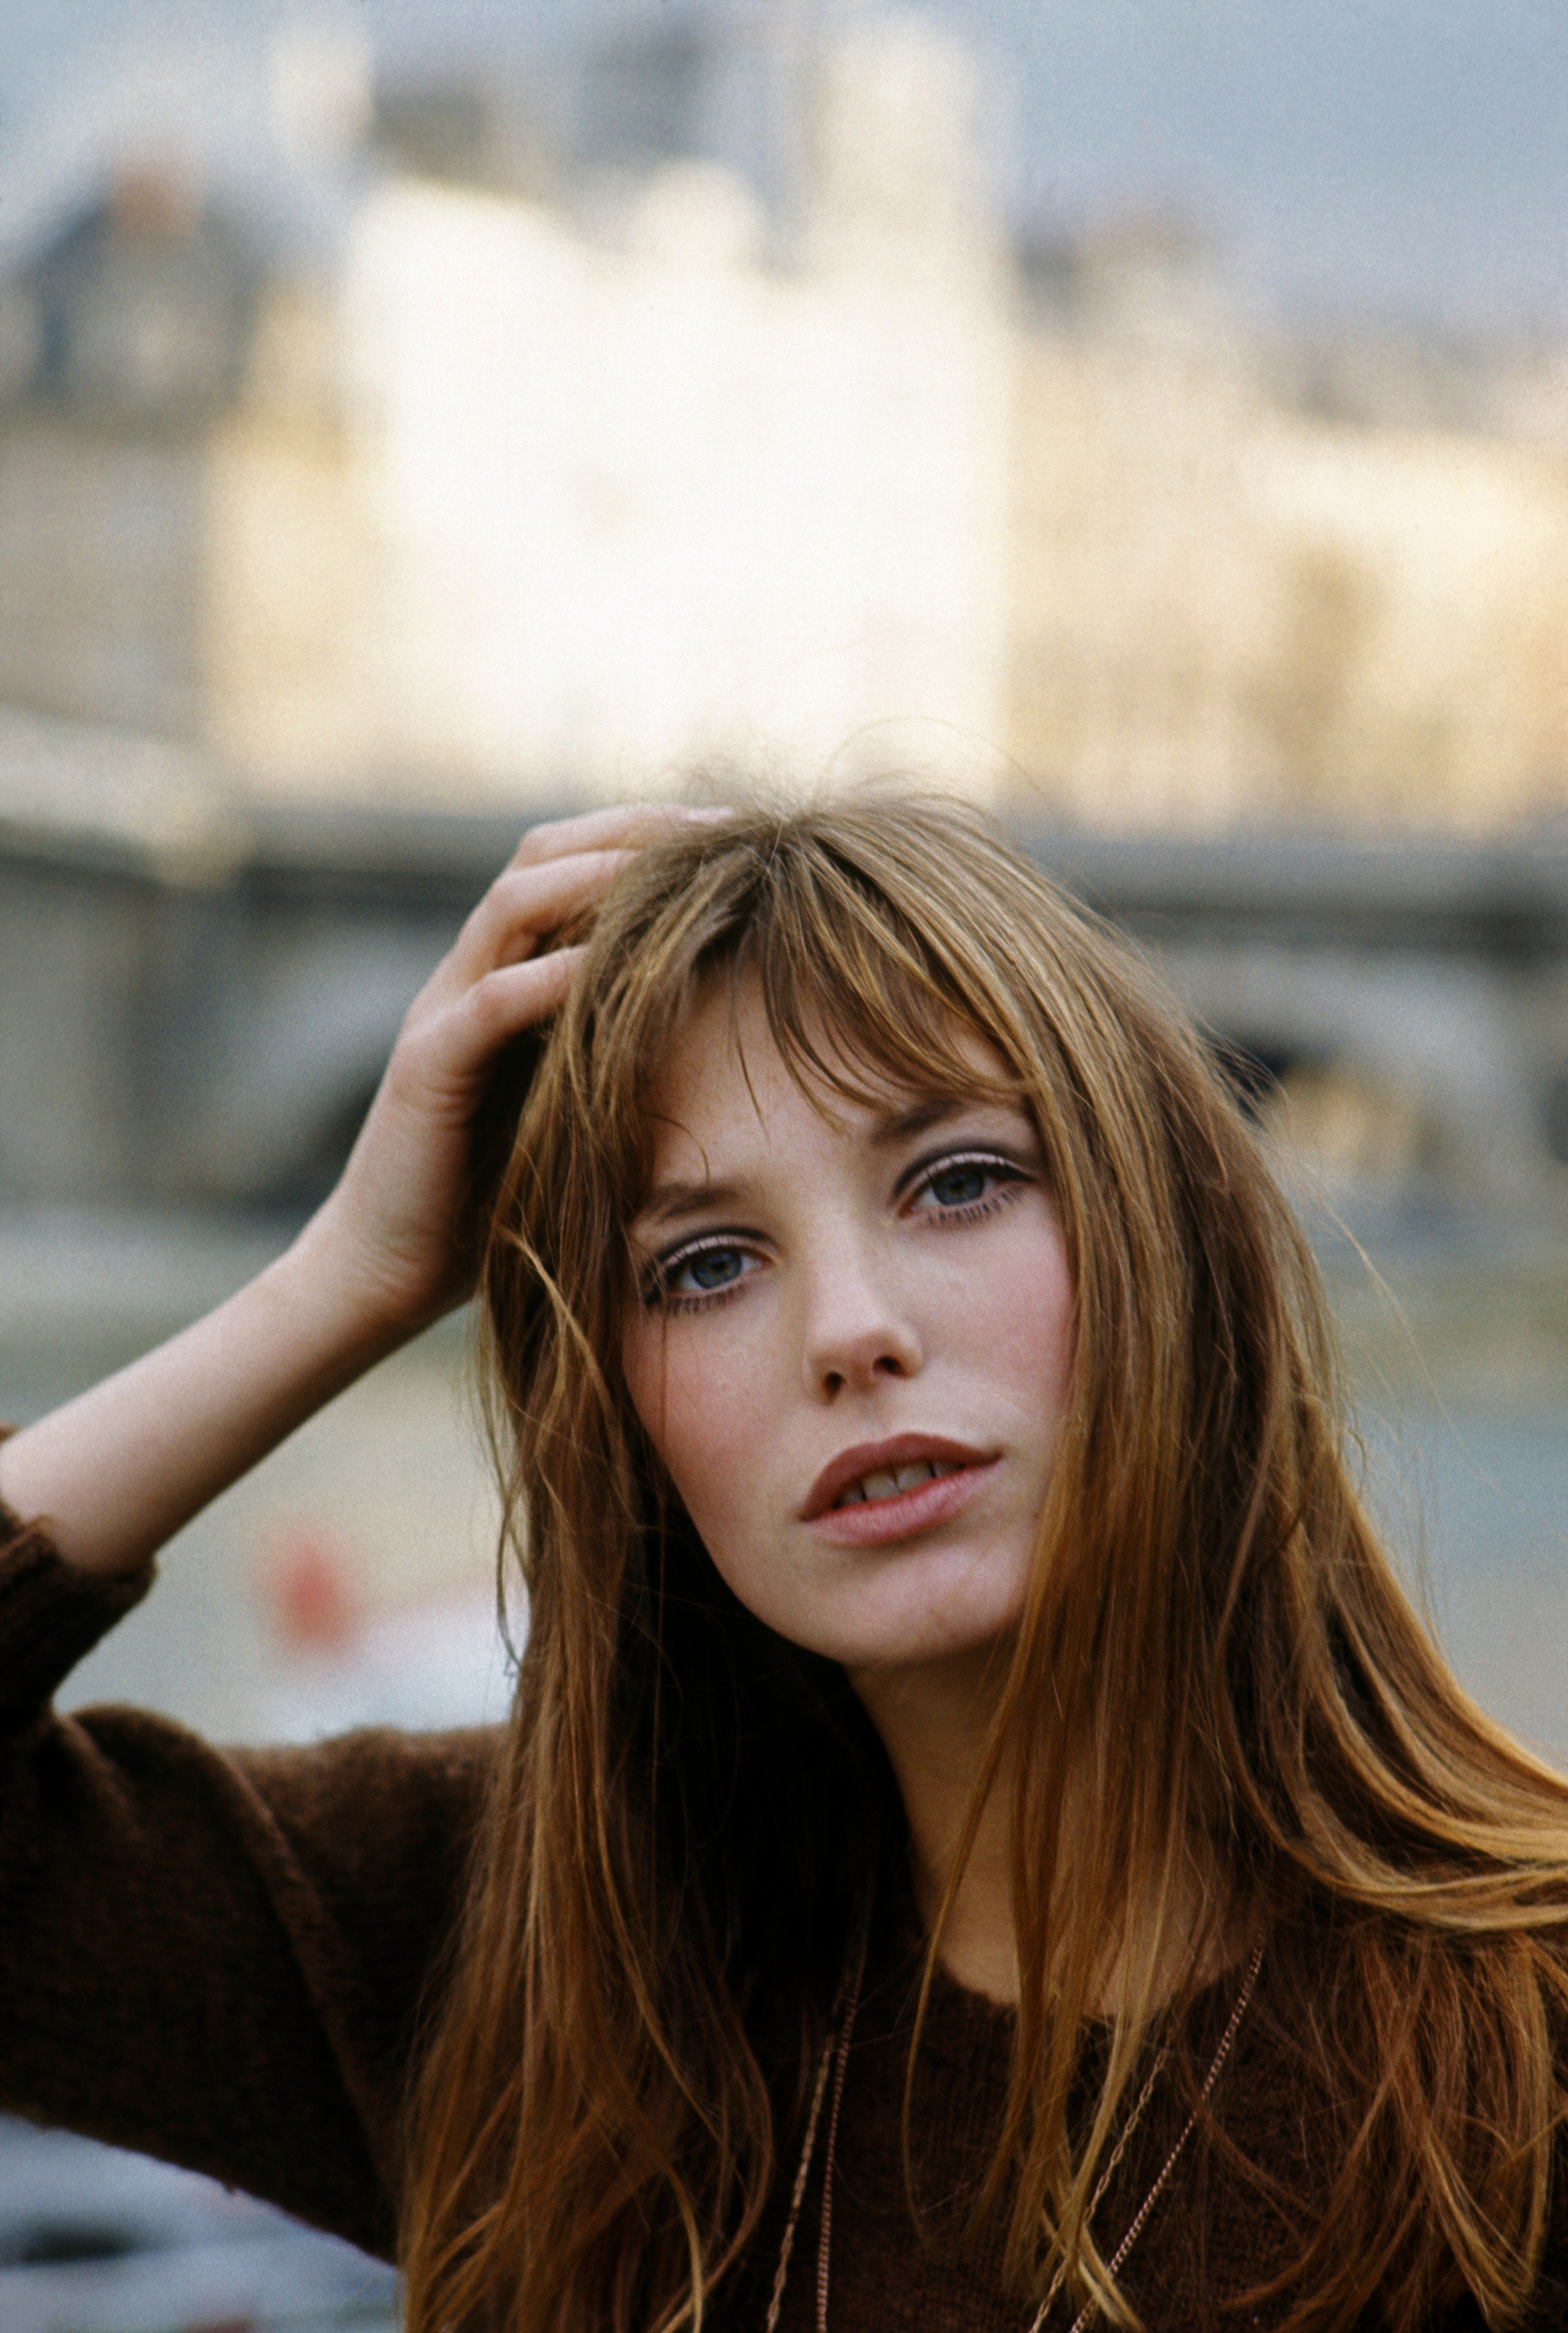 Photographer Kate Barry, daughter of actress and singer Jane